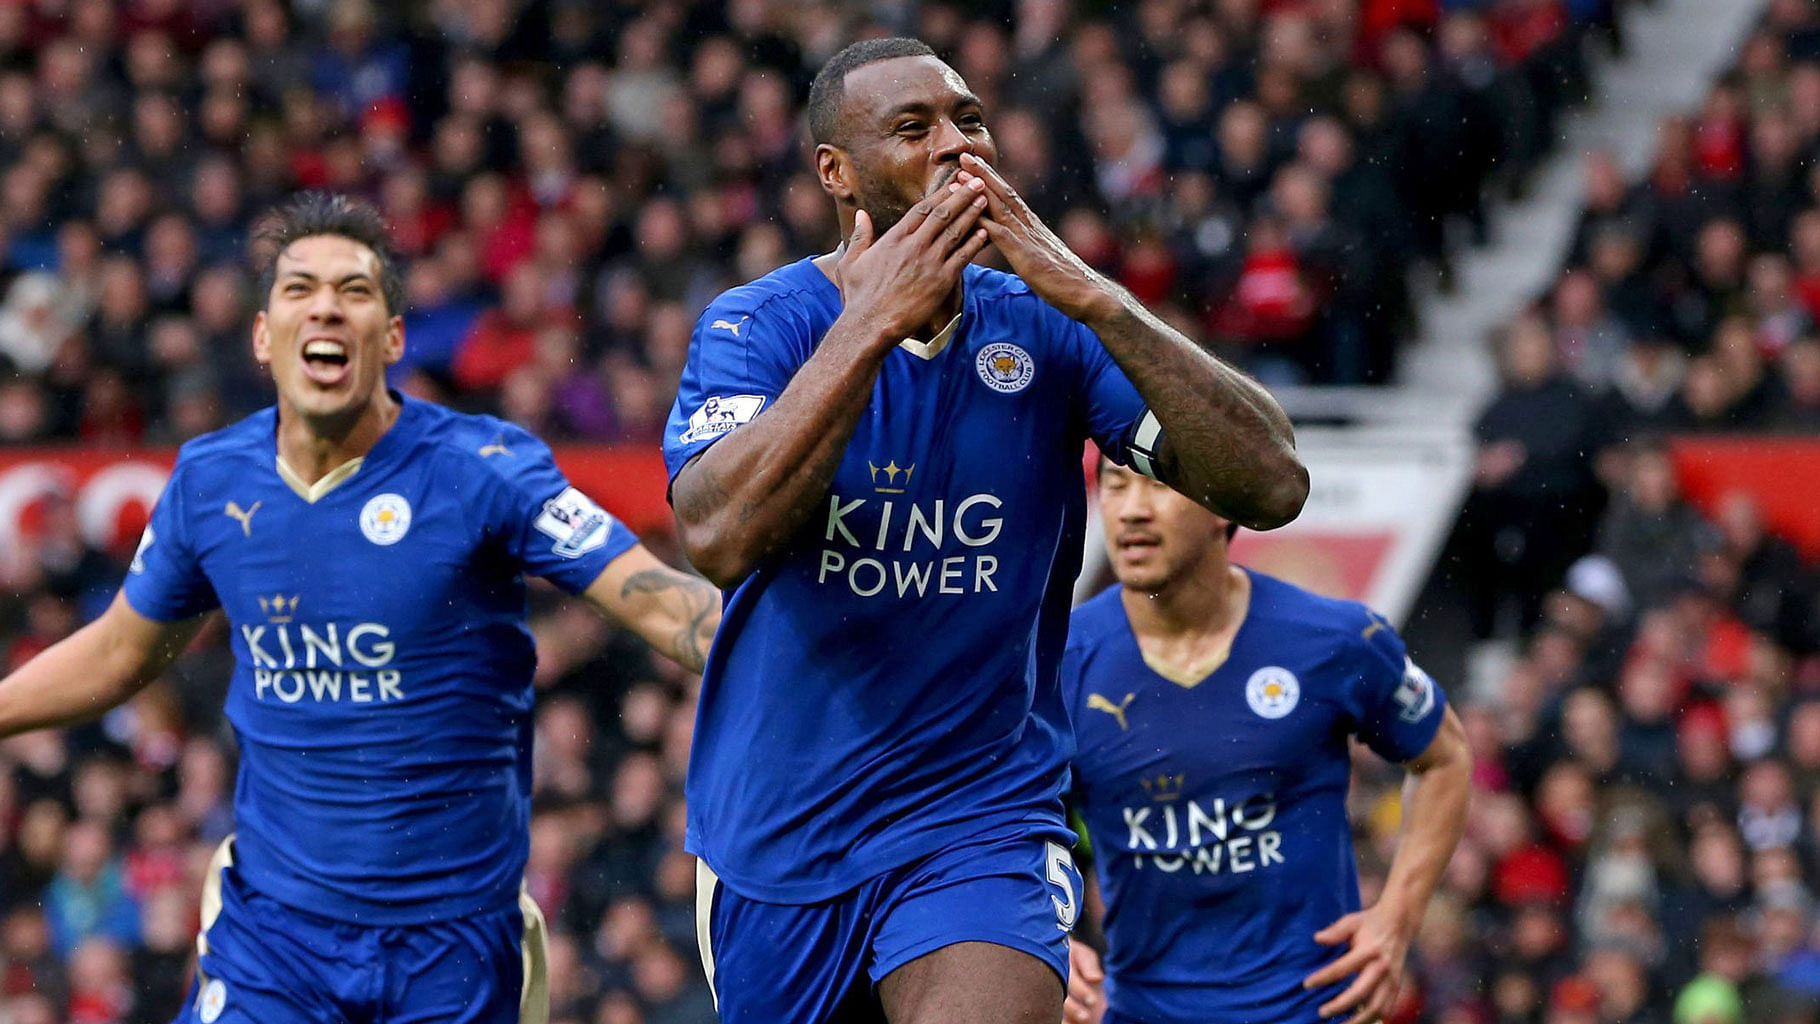 Leicester City’s Wes Morgan celebrates after scoring his side’s goal. (Photo: AP)